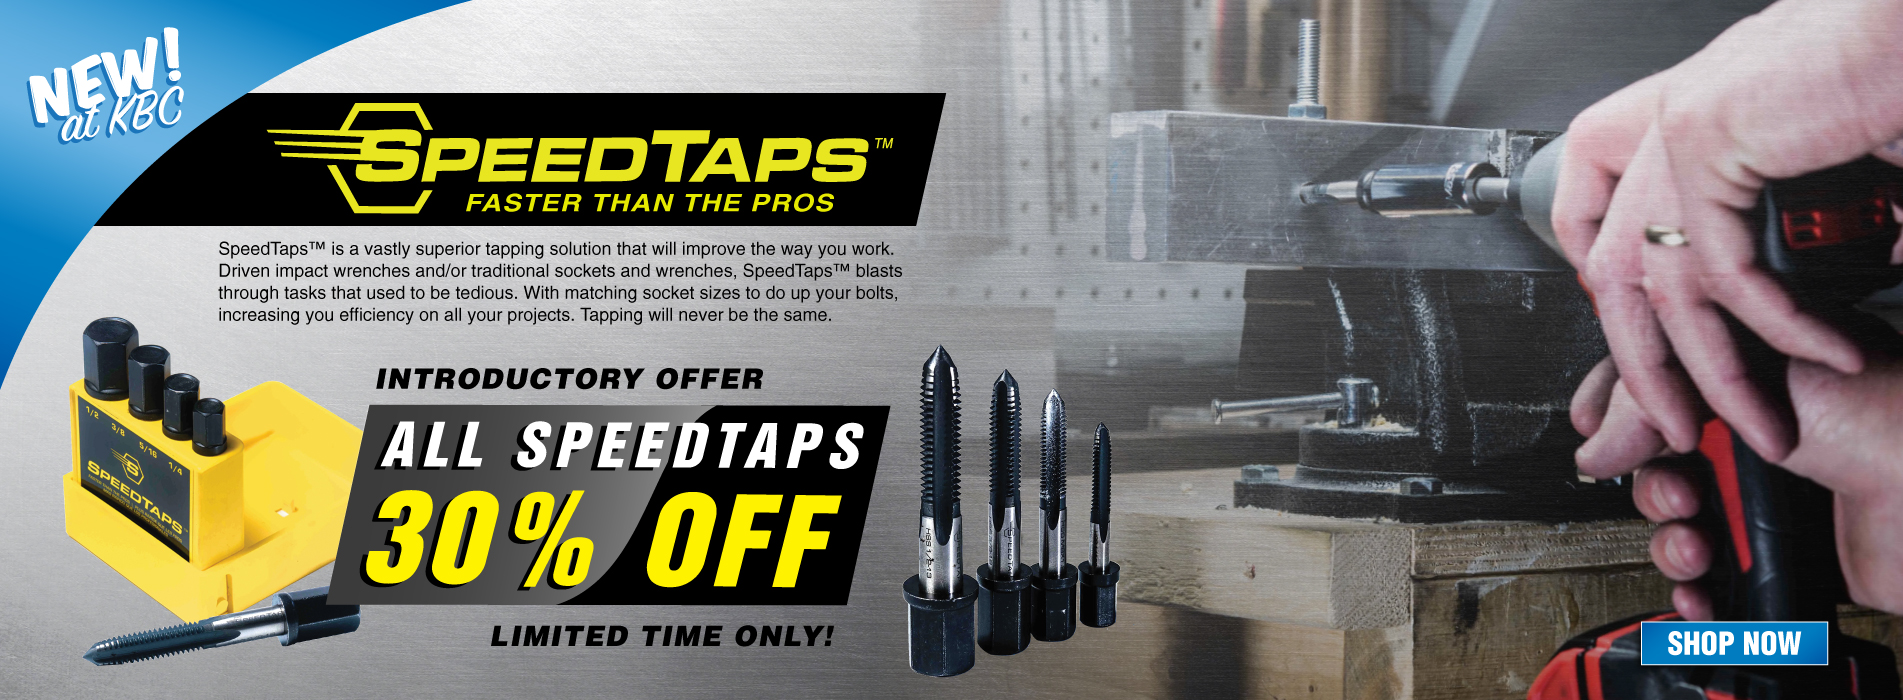 All New SpeedTaps at KBC, Faster Than The Pros